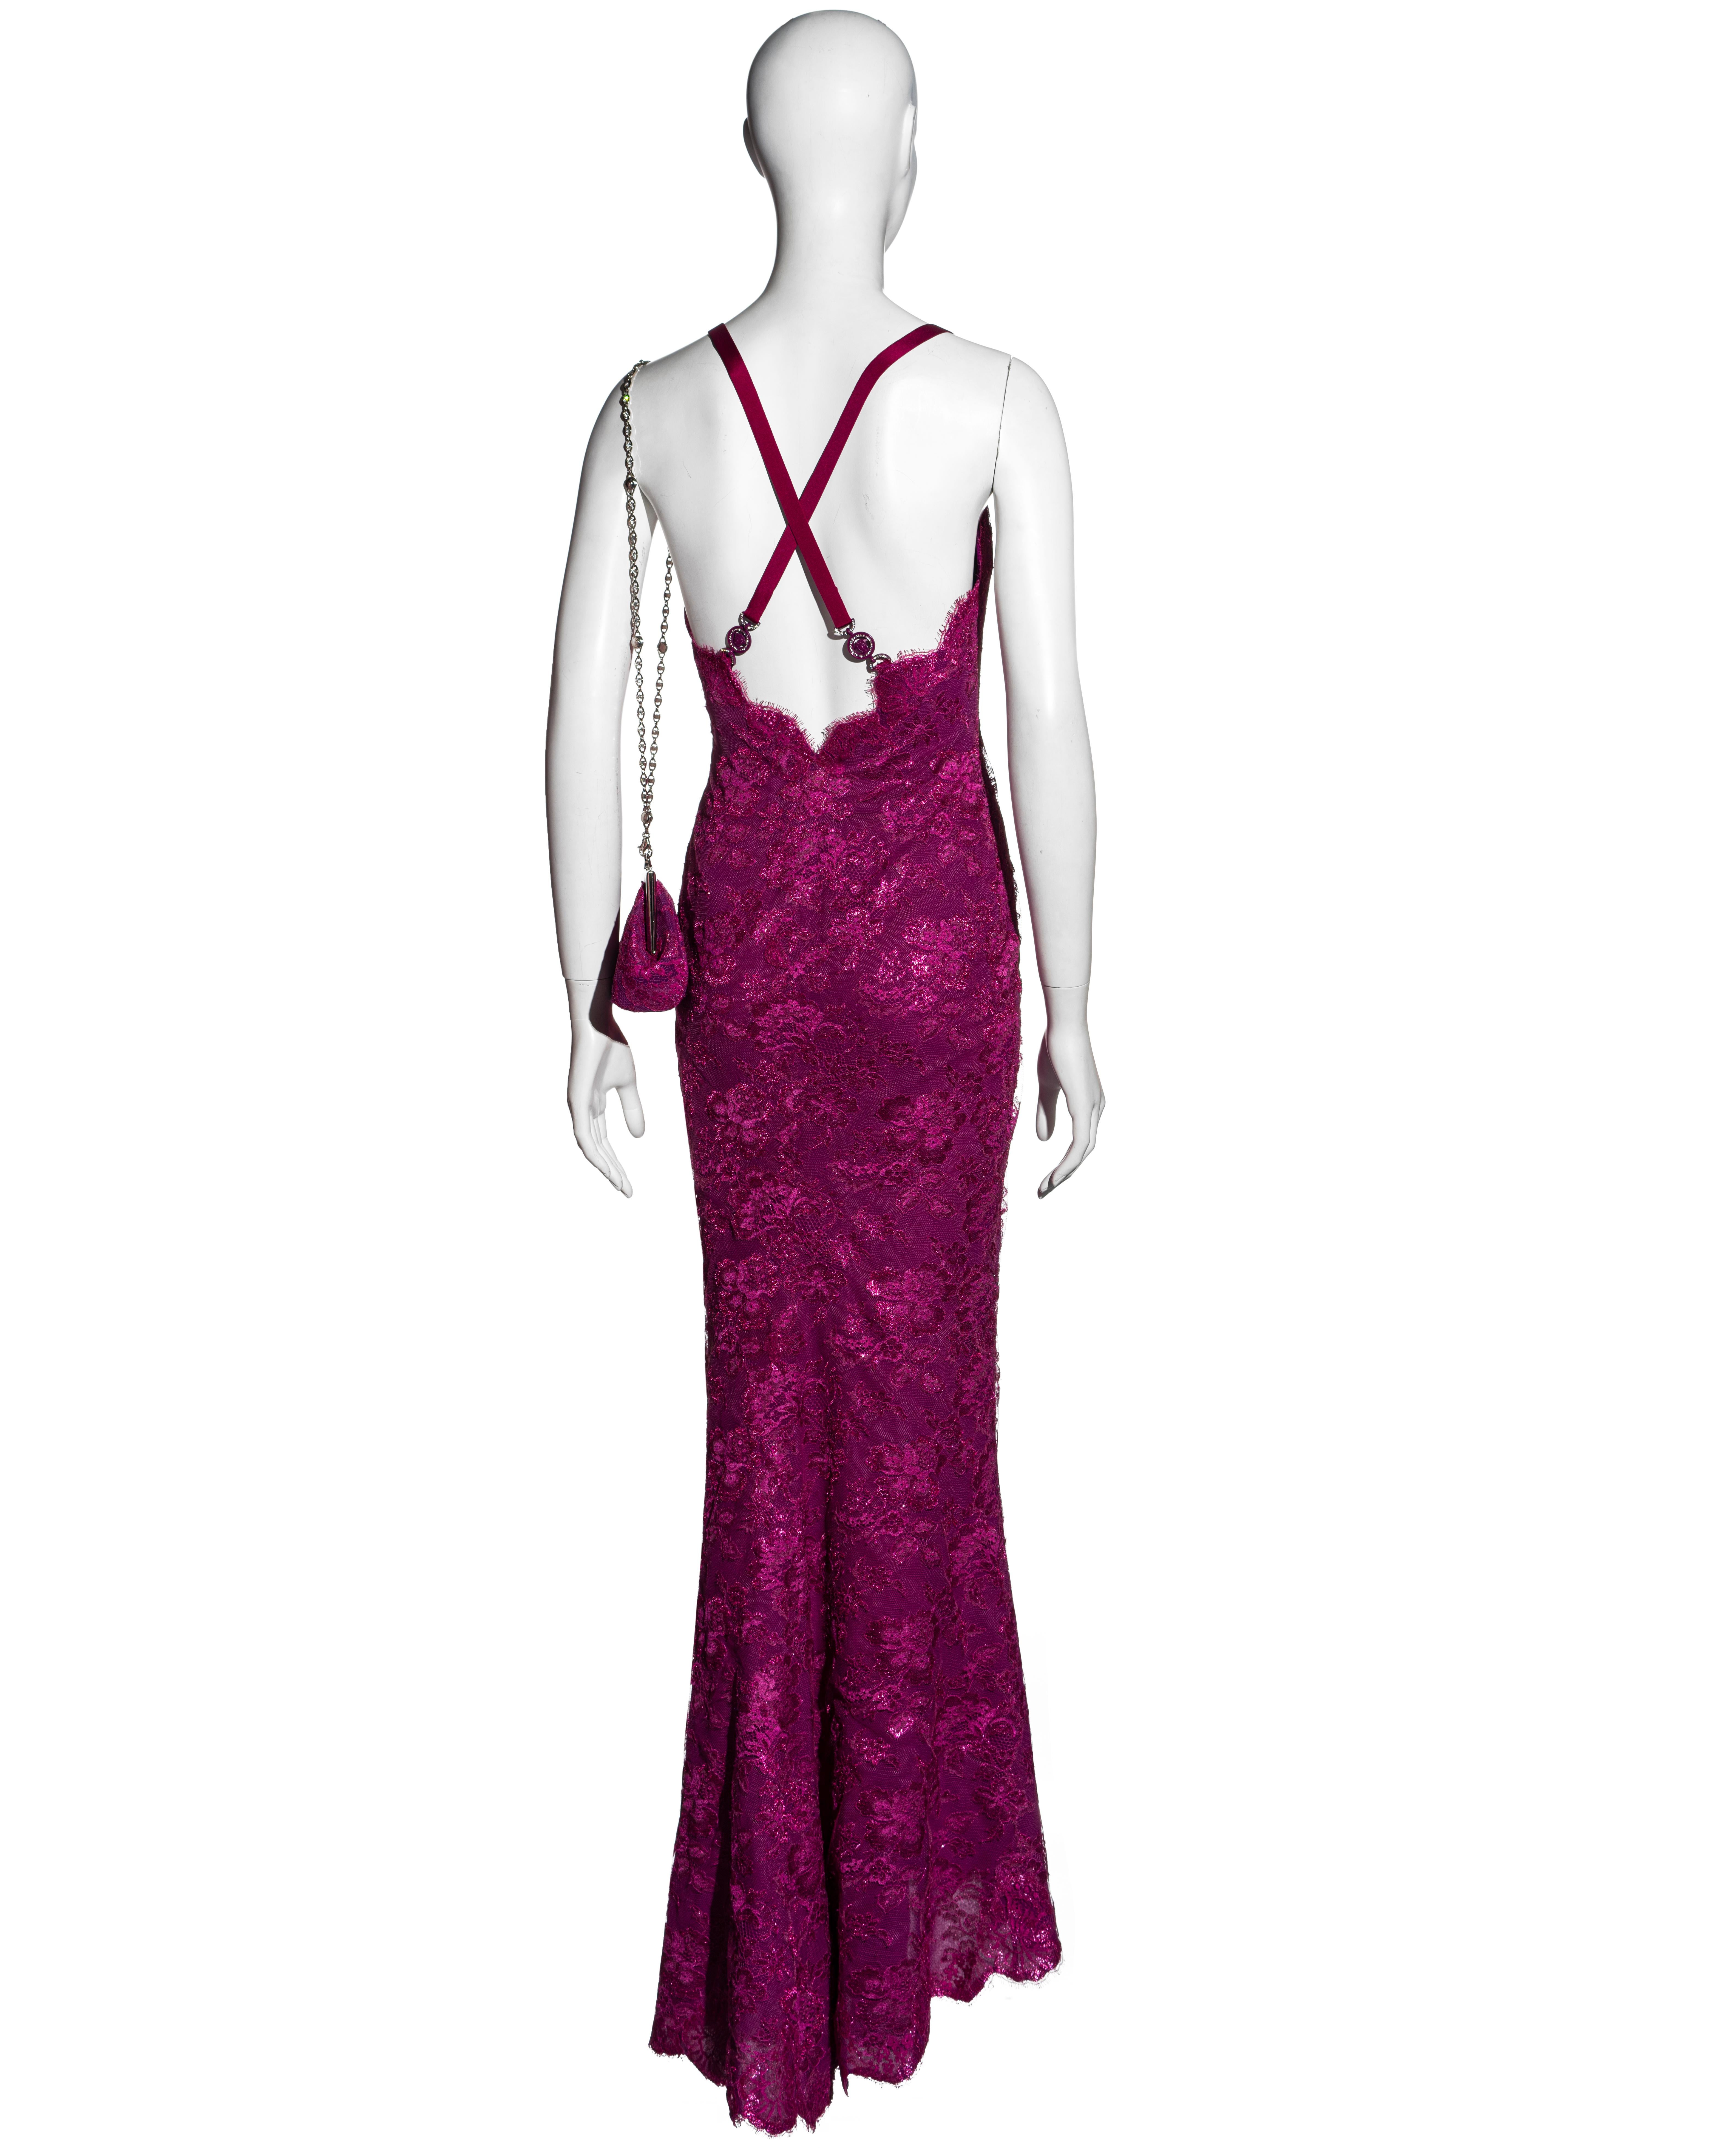 Atelier Versace Haute Couture magenta pink lace evening dress and purse, ss 1996 7